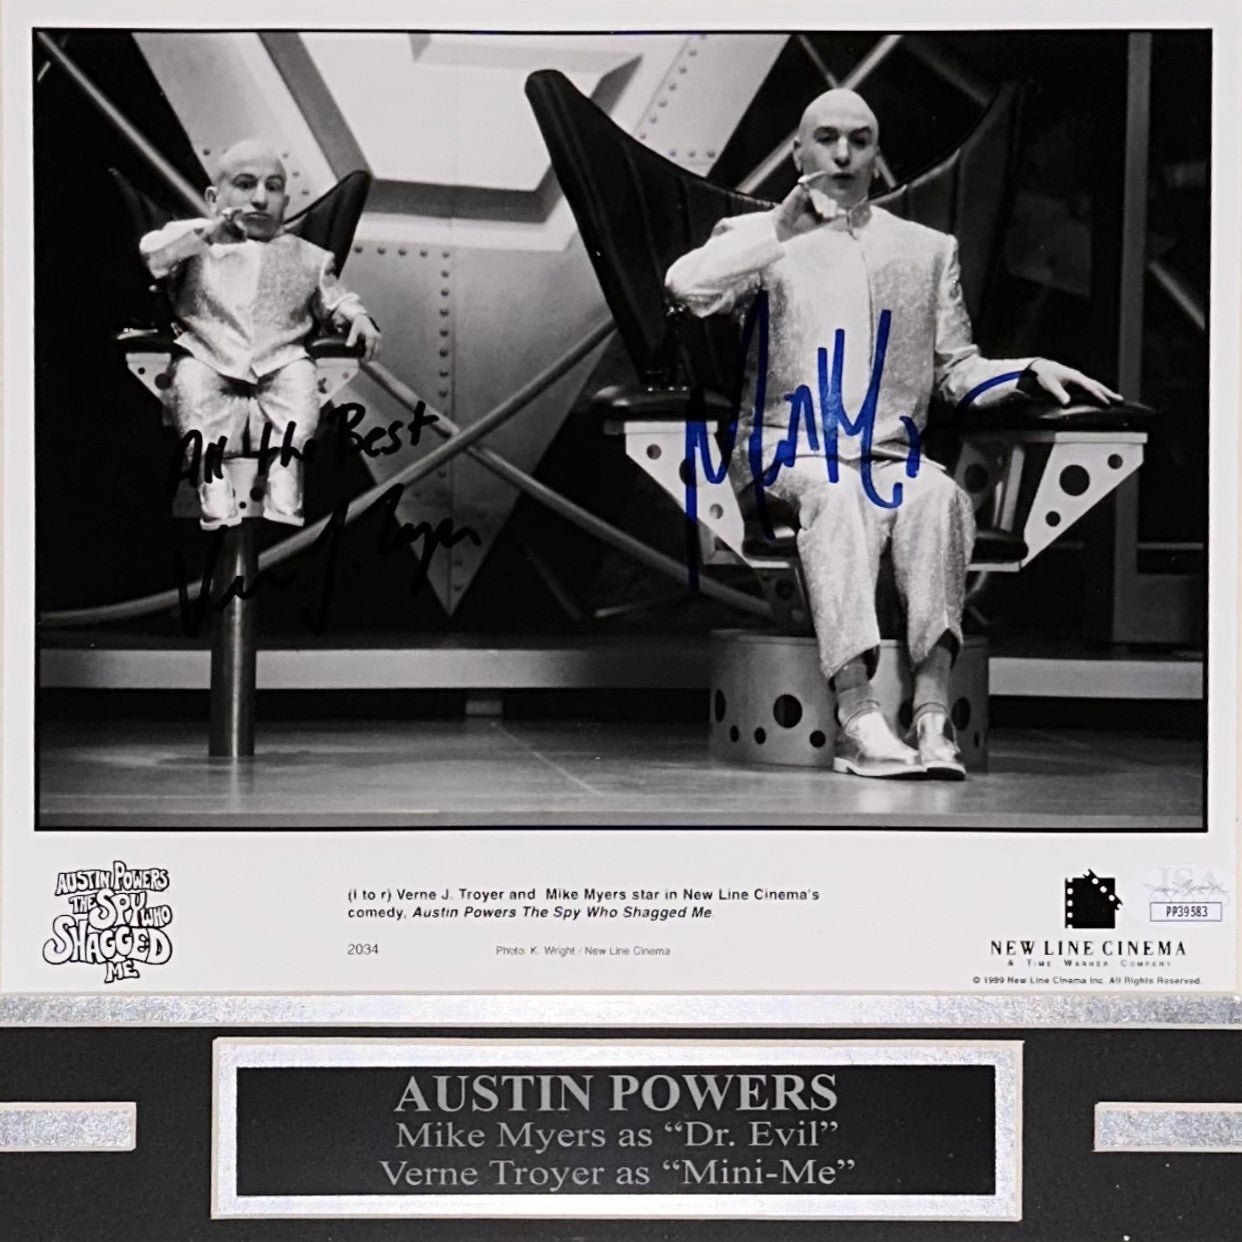 Mike Myers And Verne Troyer (Dr Evil with Mini Me) Autographed Austin Powers Deluxe Framed 8x10 Photo